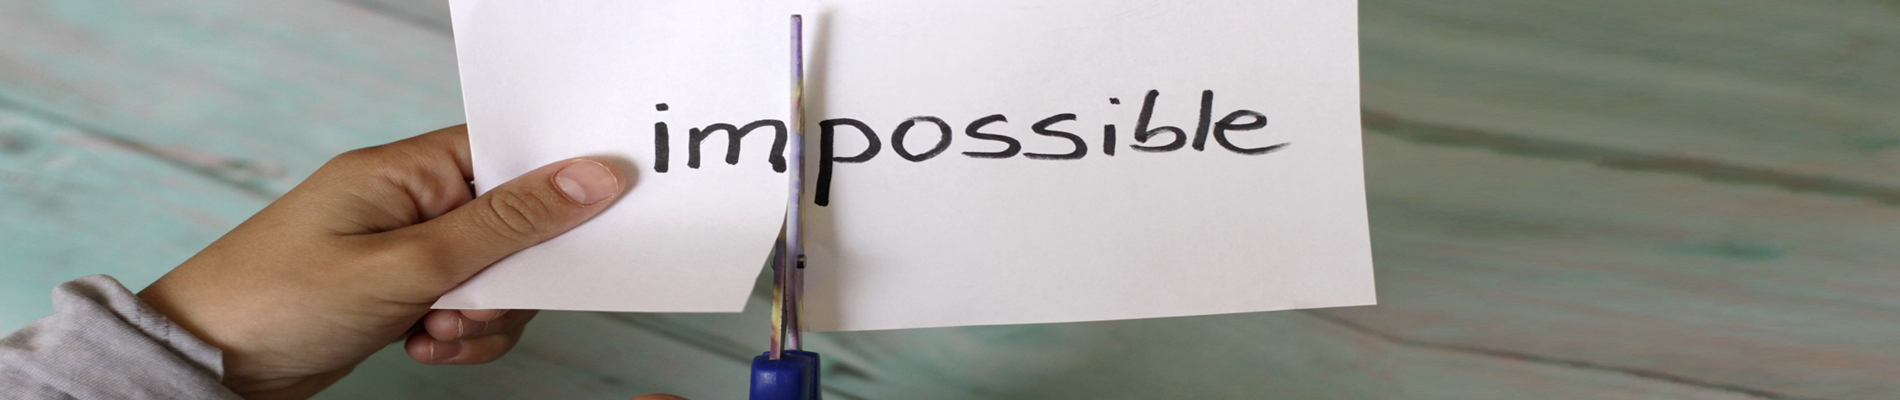 Paper being cut dividing the word impossible to possible